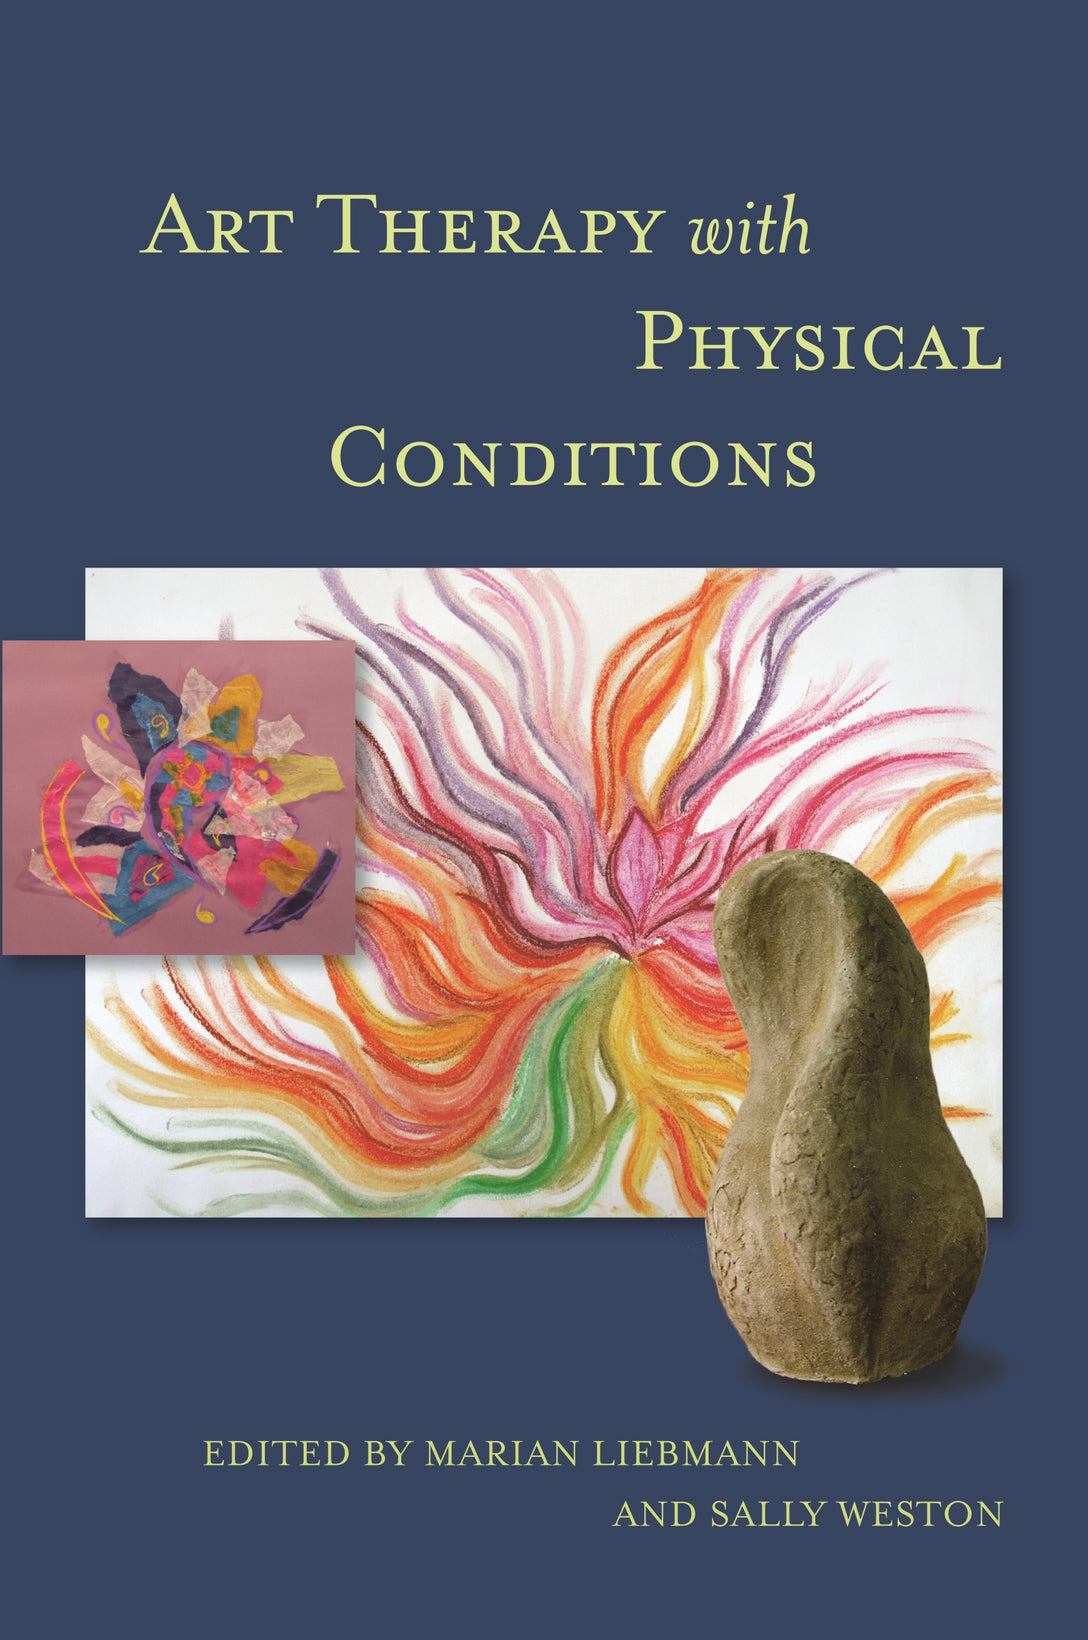 Art Therapy with Physical Conditions by No Author Listed, Sally Weston, Marian Liebmann, Trevor Thompson